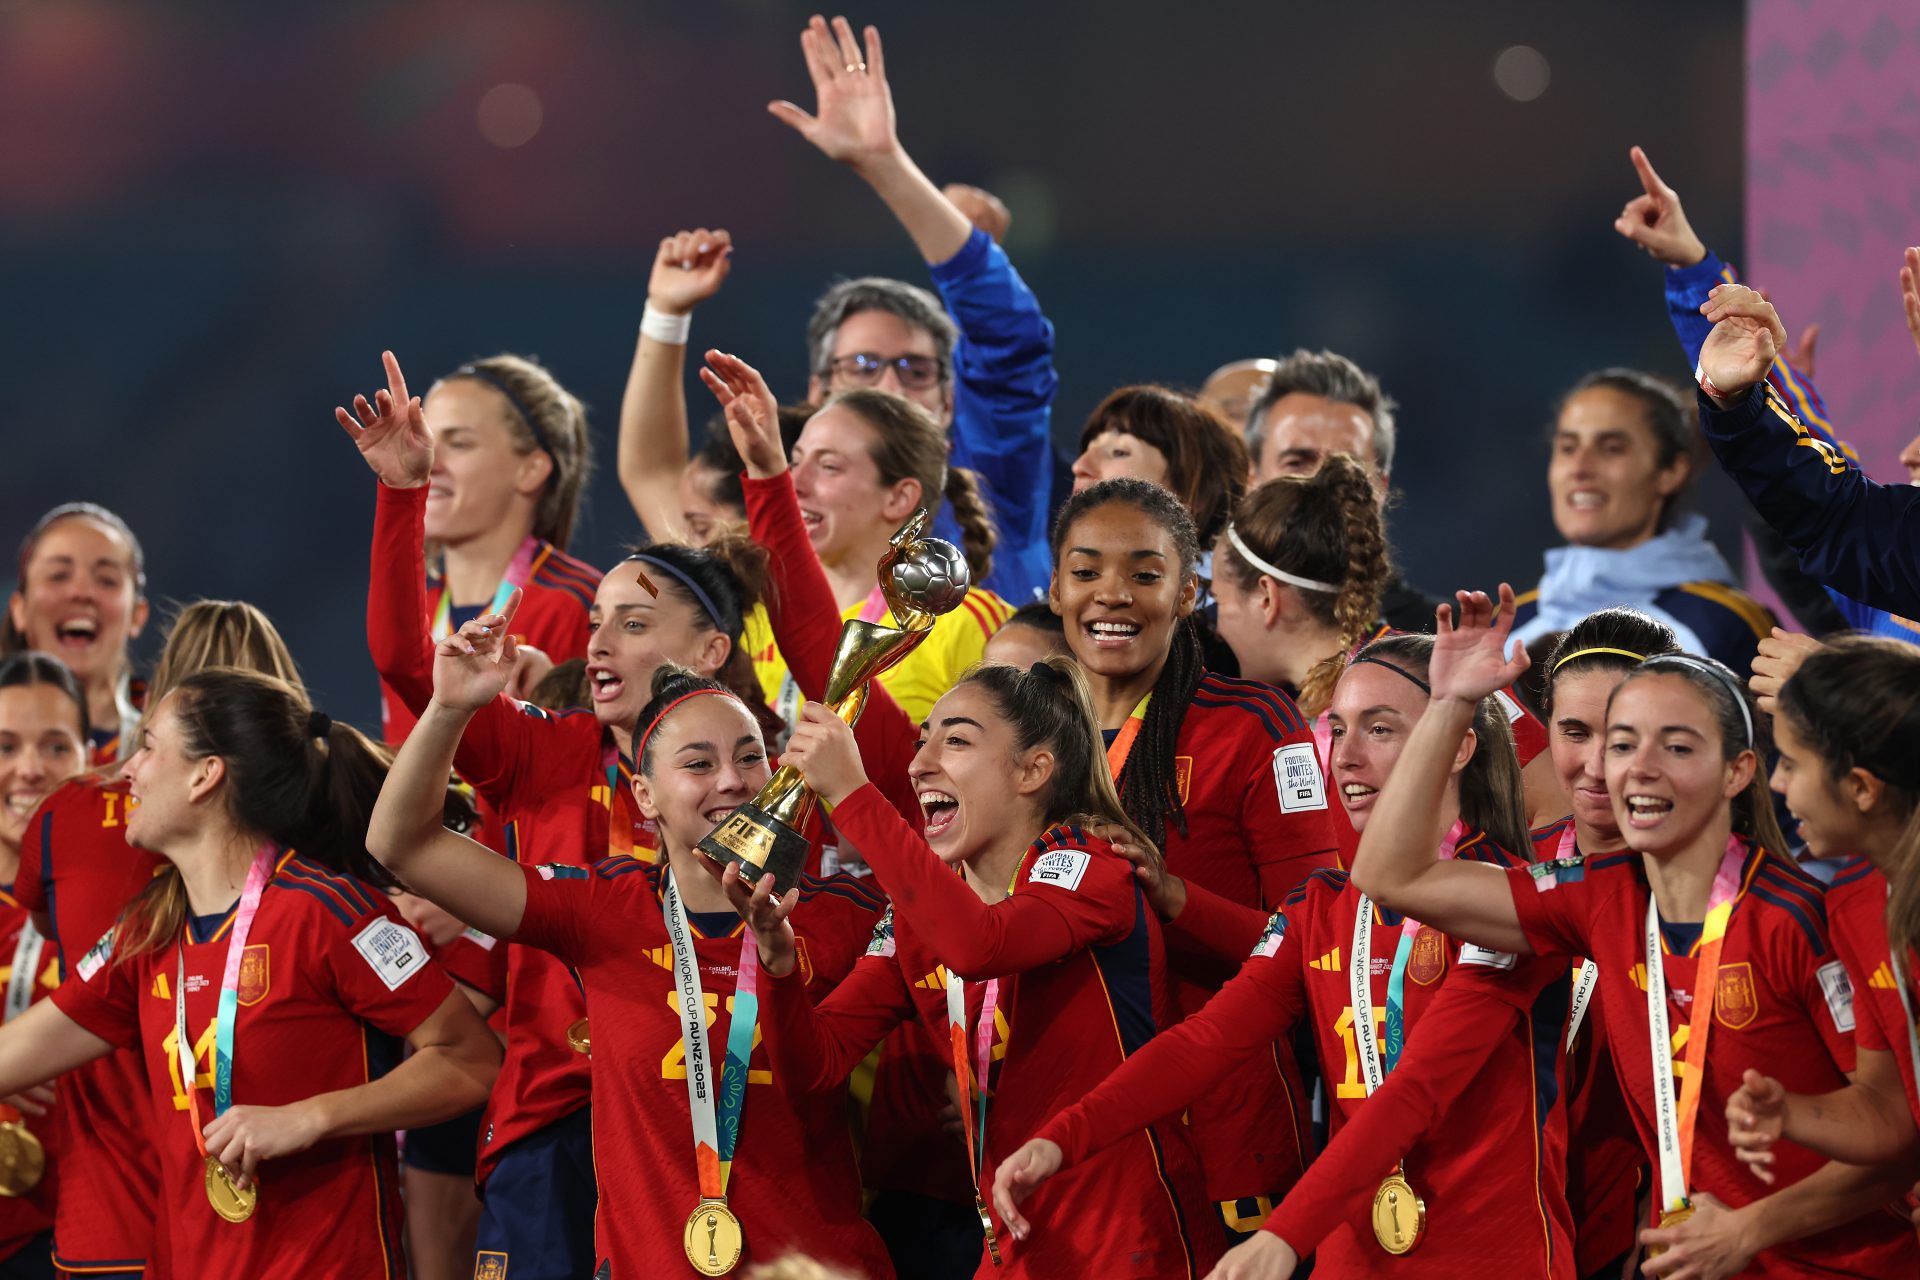 The most exciting images of Spain's victory in the Women's World Cup